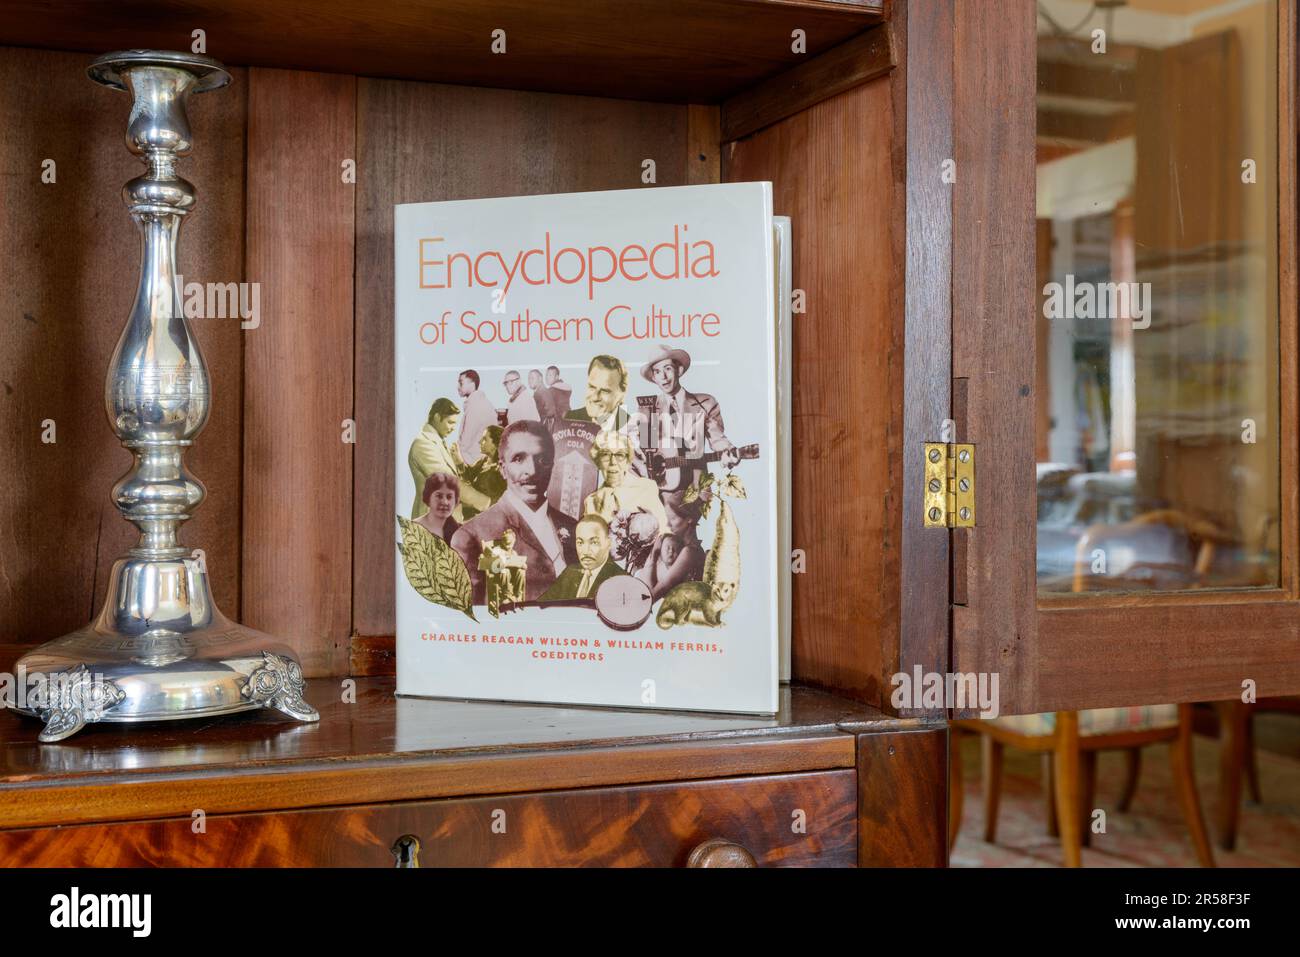 NEW ORLEANS, LA, USA - MAY 24, 2023: The 'Encyclopedia of Southern Culture' displayed next to a silver candle holder in an open china cabinet Stock Photo